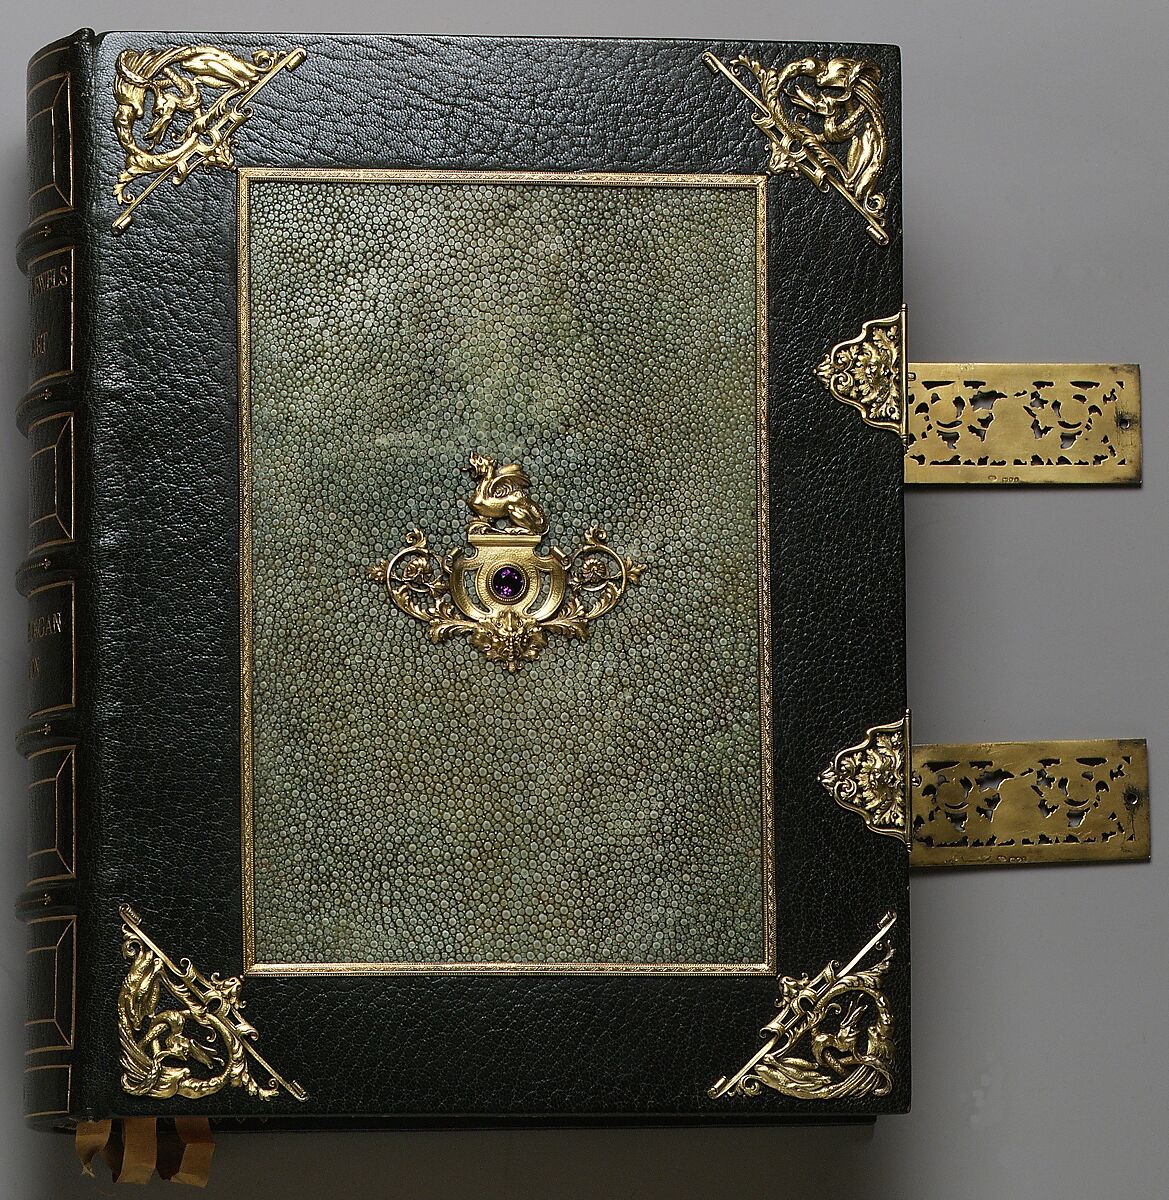 Catalogue of the Collection of Jewels and Precious Works of Art, the Property of  J. Pierpont Morgan, George Charles Williamson (British, 1858–1942), Illustrated book, fine binding, London: Chiswick Press, 1910 (deluxe ed.) 